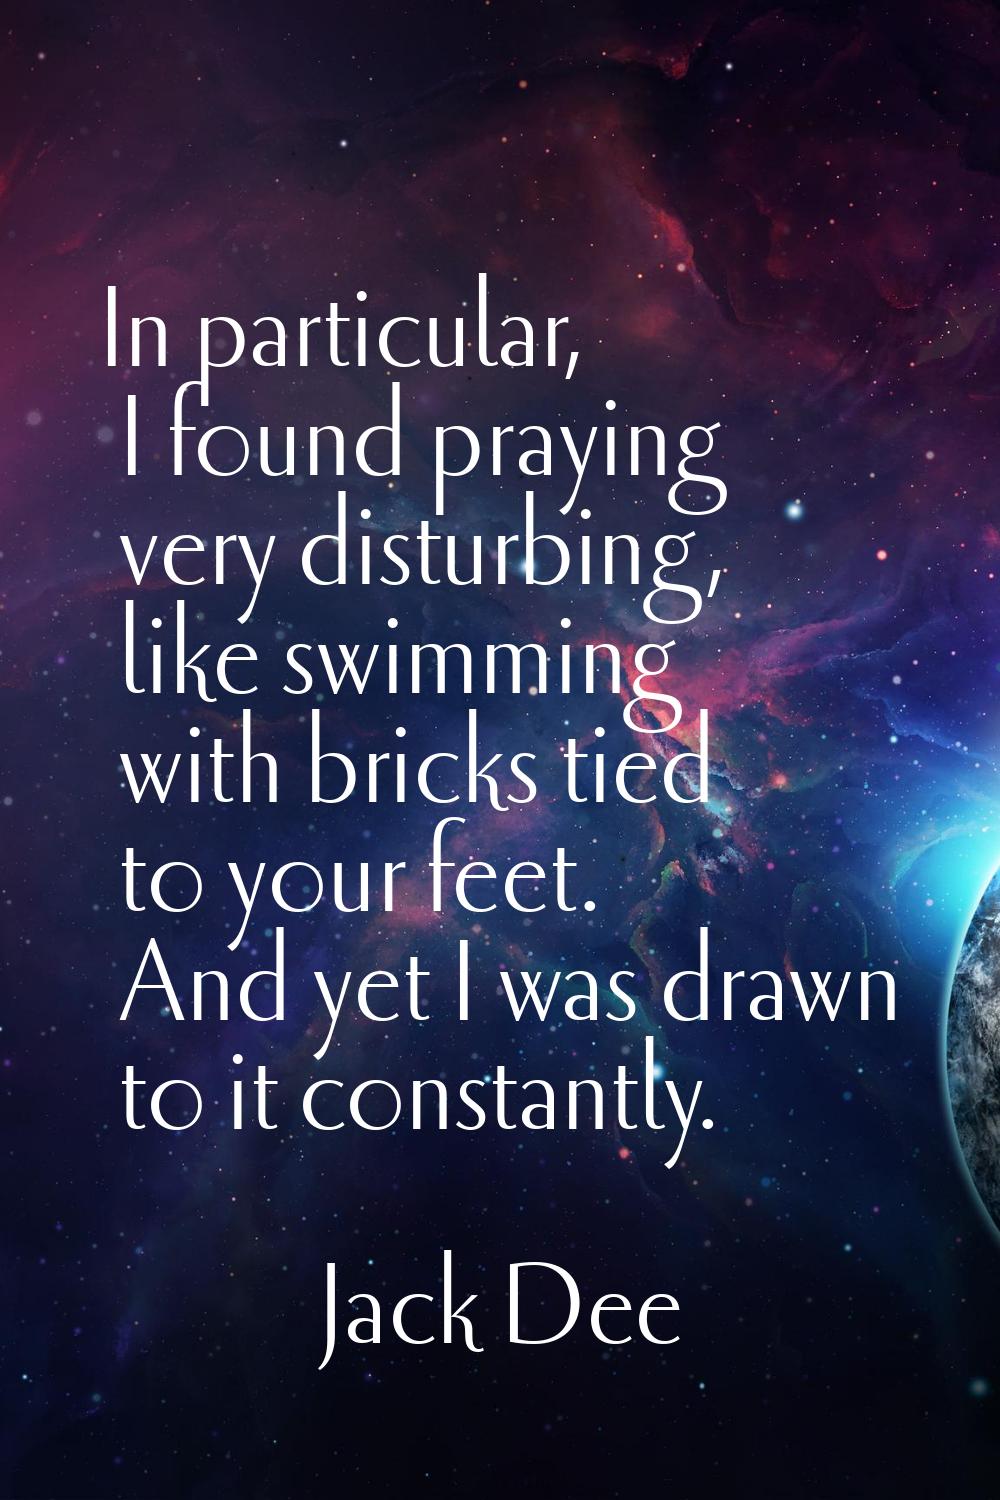 In particular, I found praying very disturbing, like swimming with bricks tied to your feet. And ye